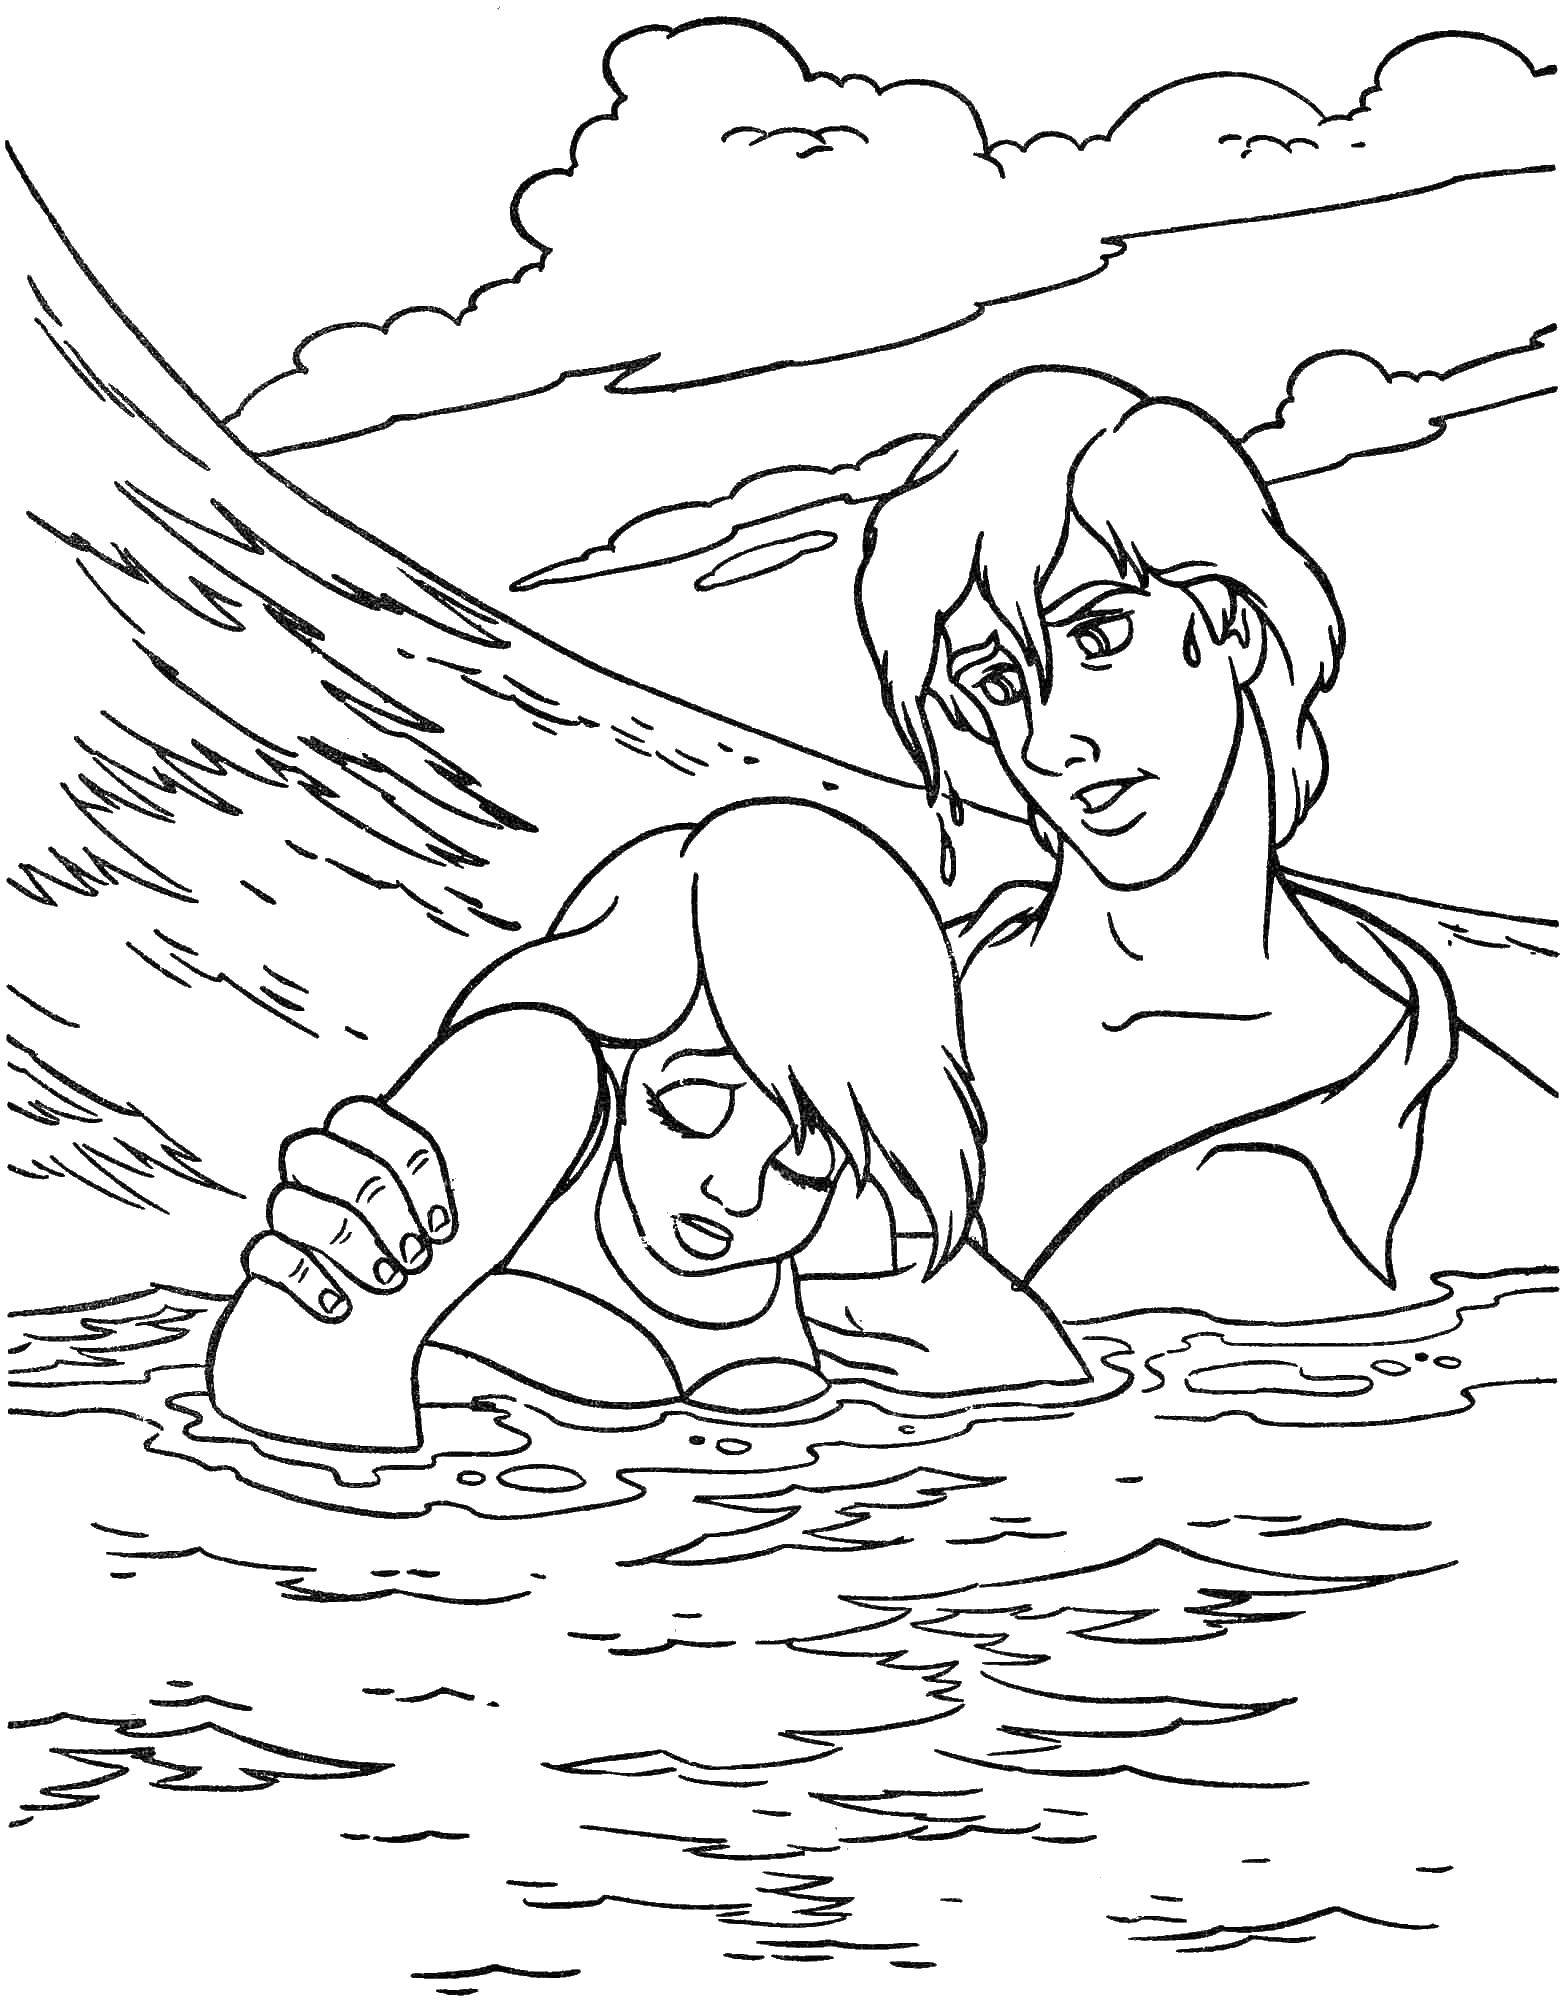 Coloring Eric saved Ariel. Category The little mermaid. Tags:  Disney, the little mermaid, Ariel.